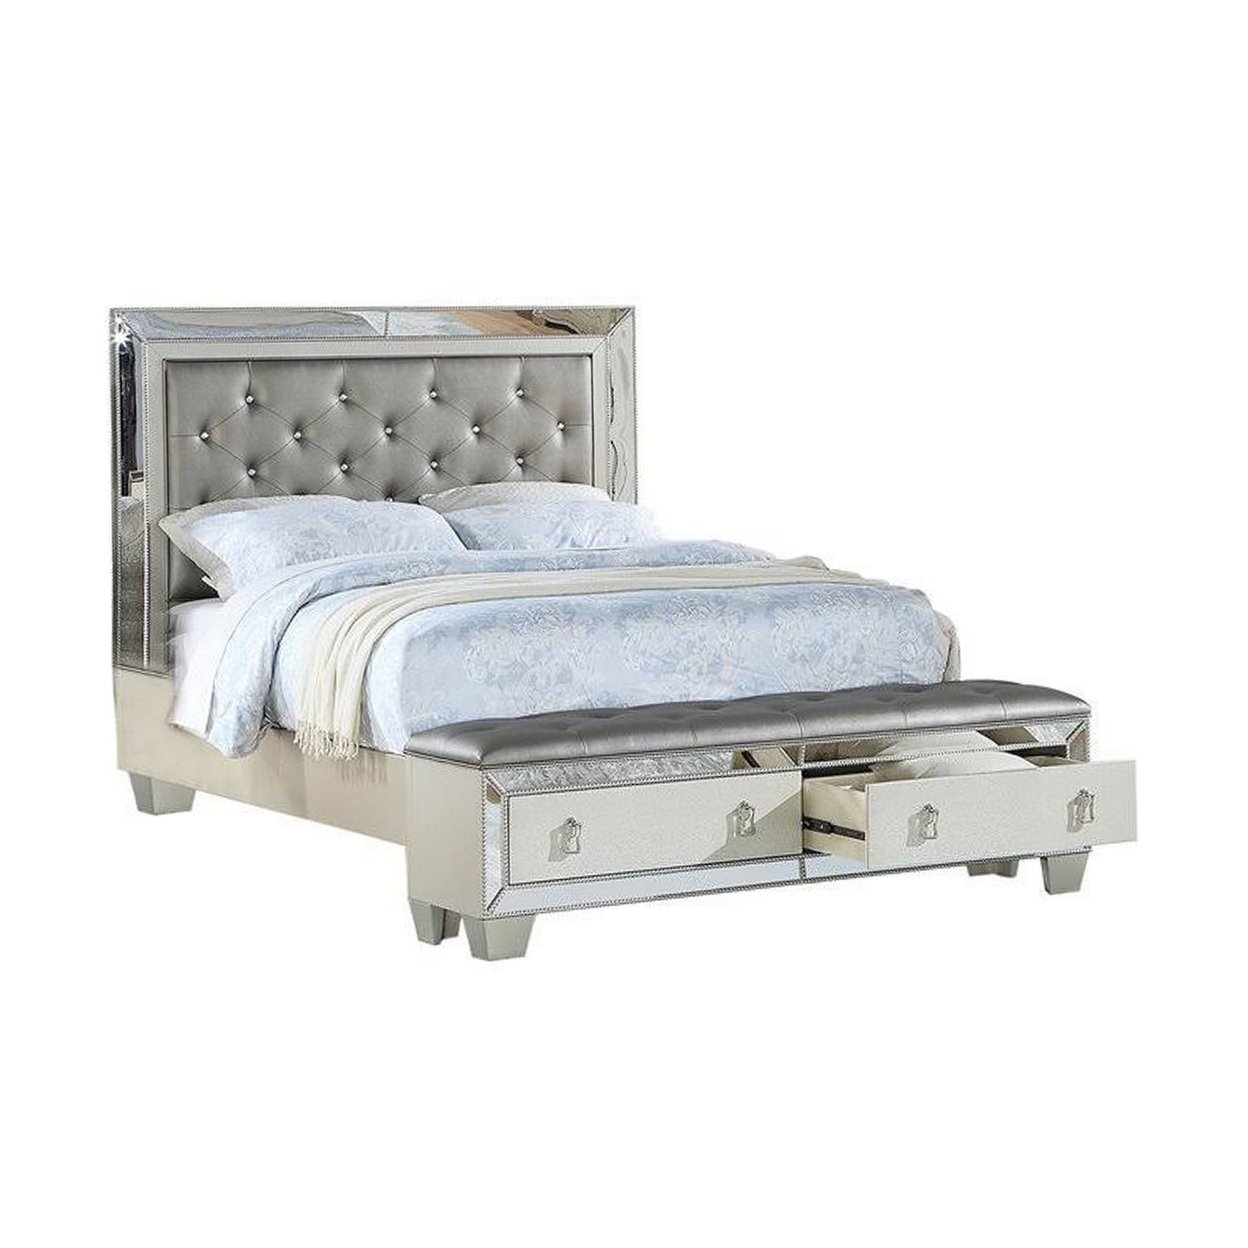 Reva Queen Bed, Storage Footboard, Silver Faux Leather Tufted Upholstery- Saltoro Sherpi